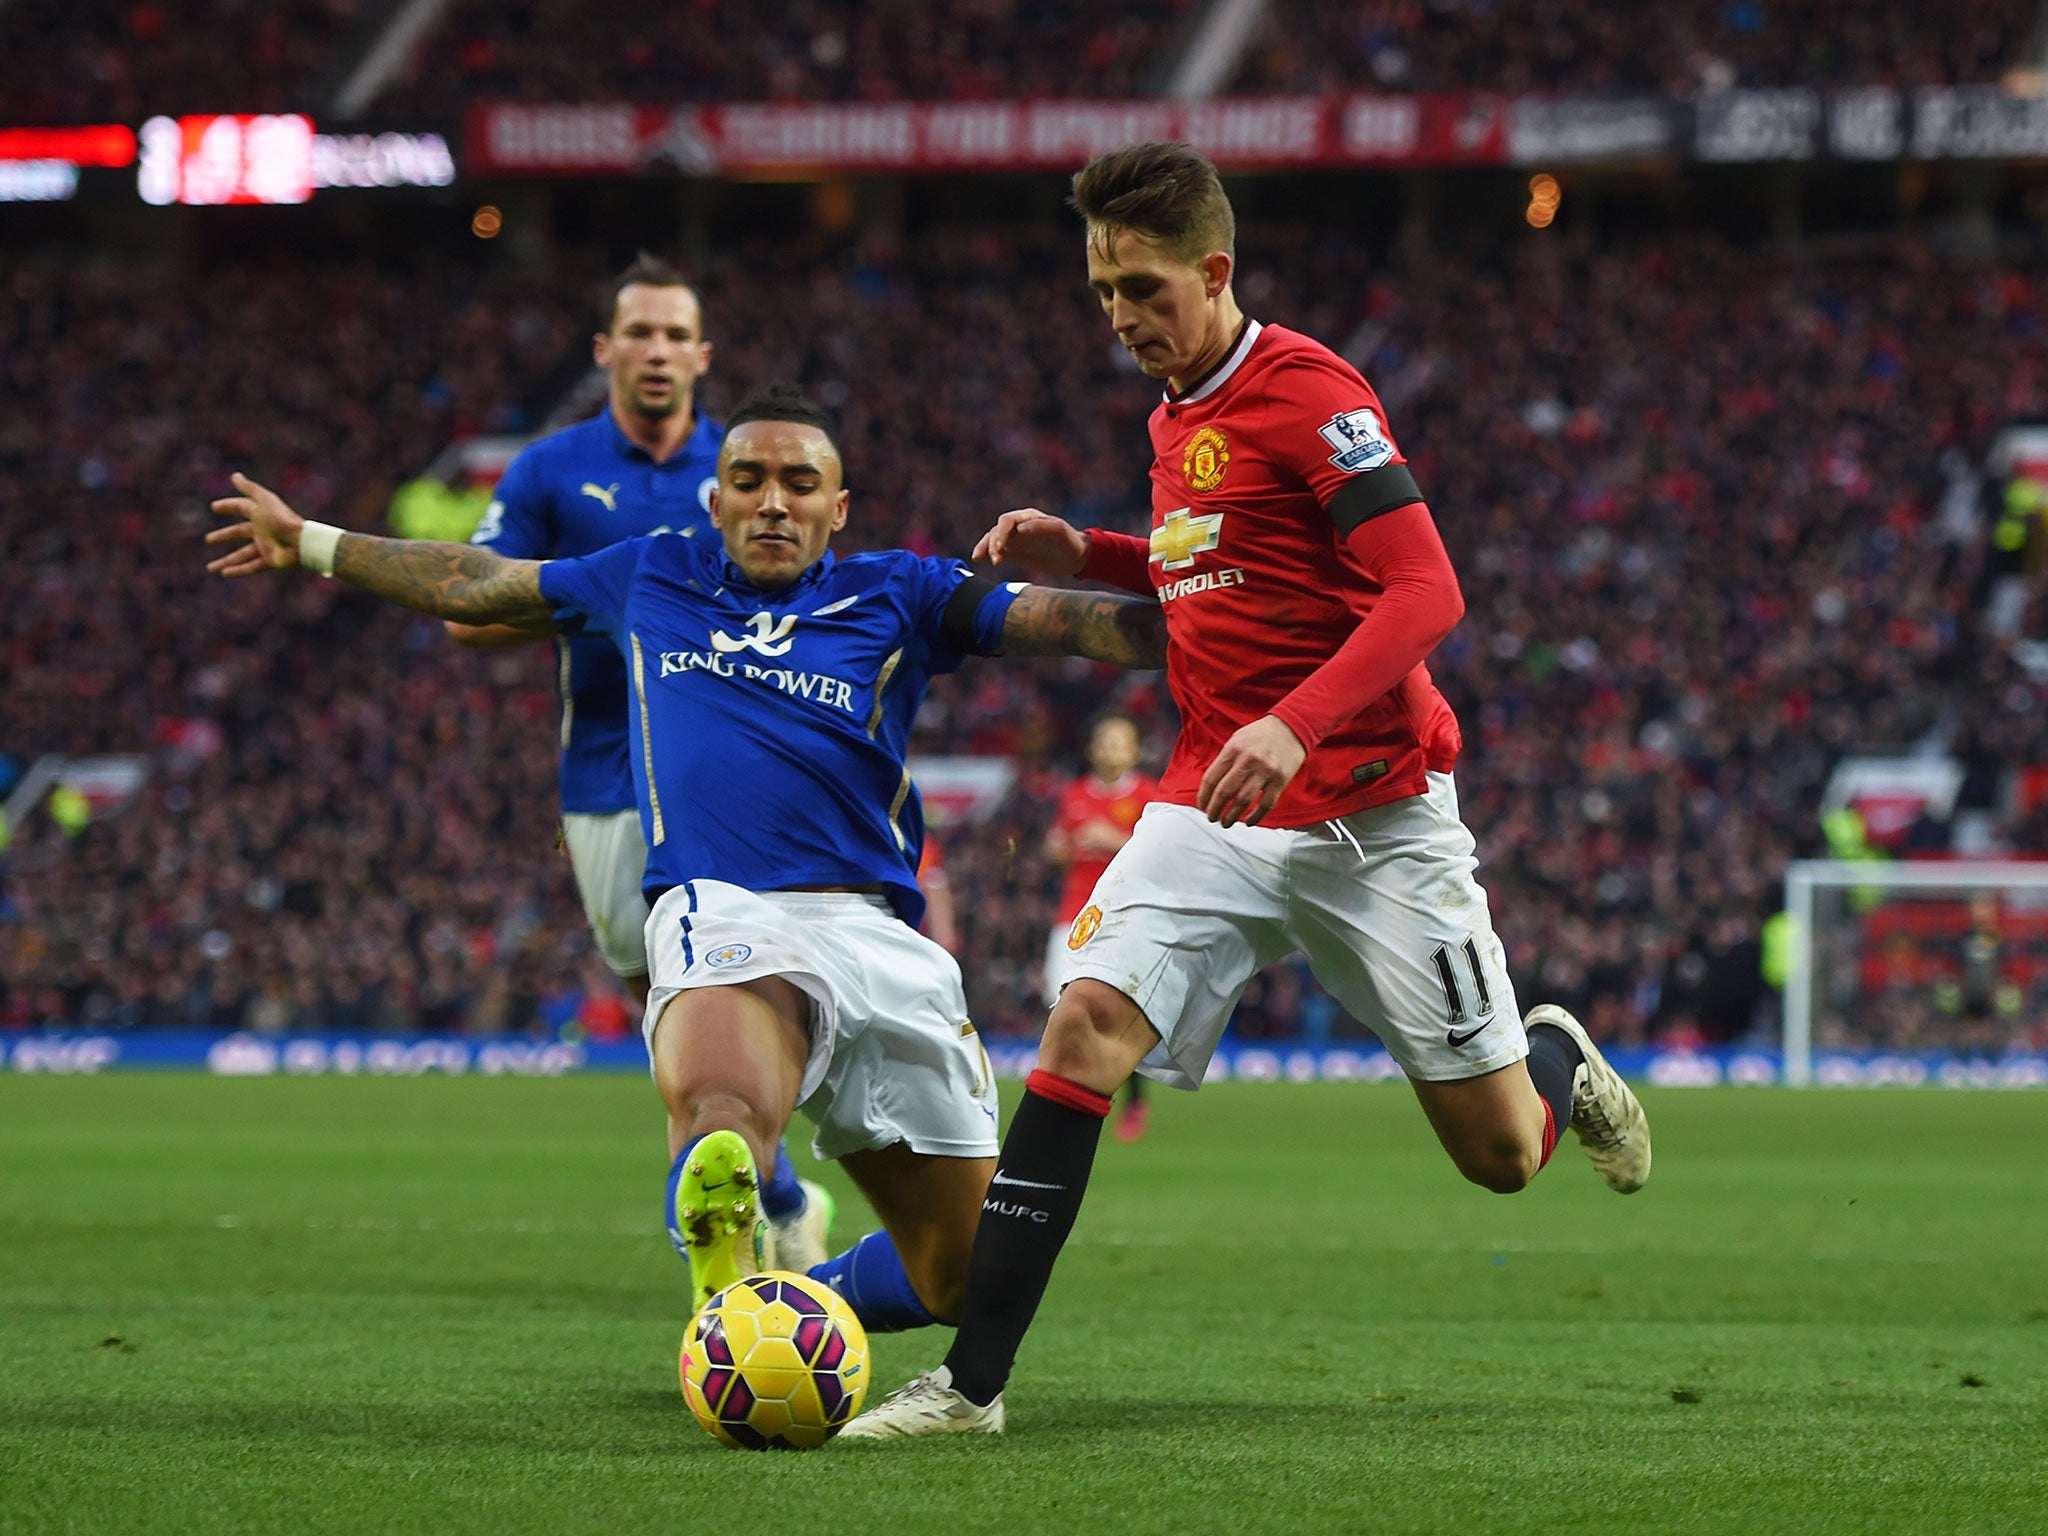 Adnan Januzaj must show quality and commitment to be a first-team regular at Old Trafford